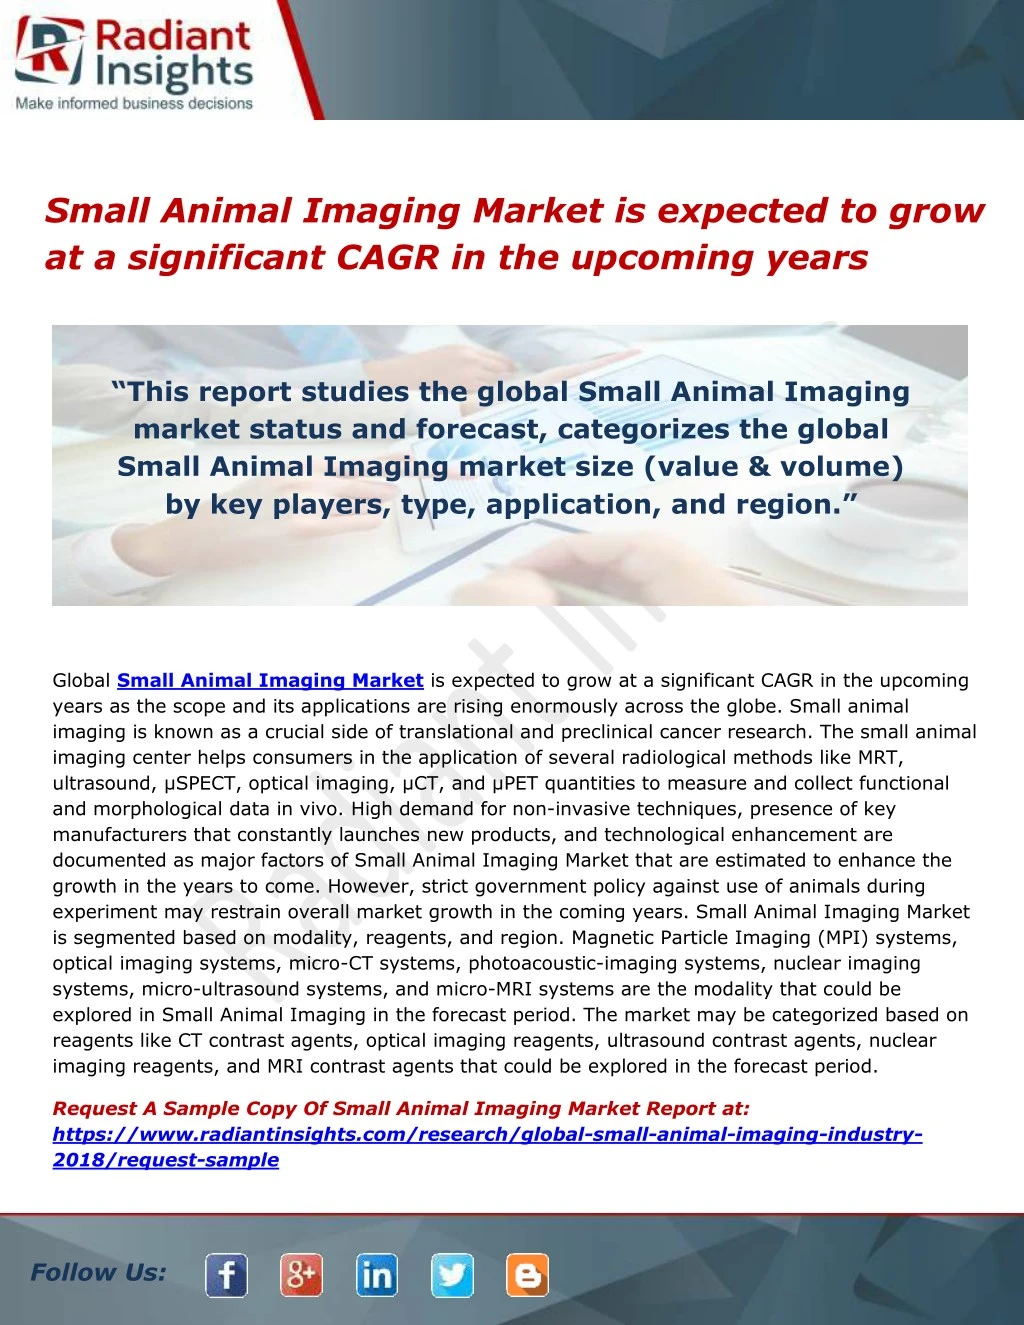 small animal imaging market is expected to grow